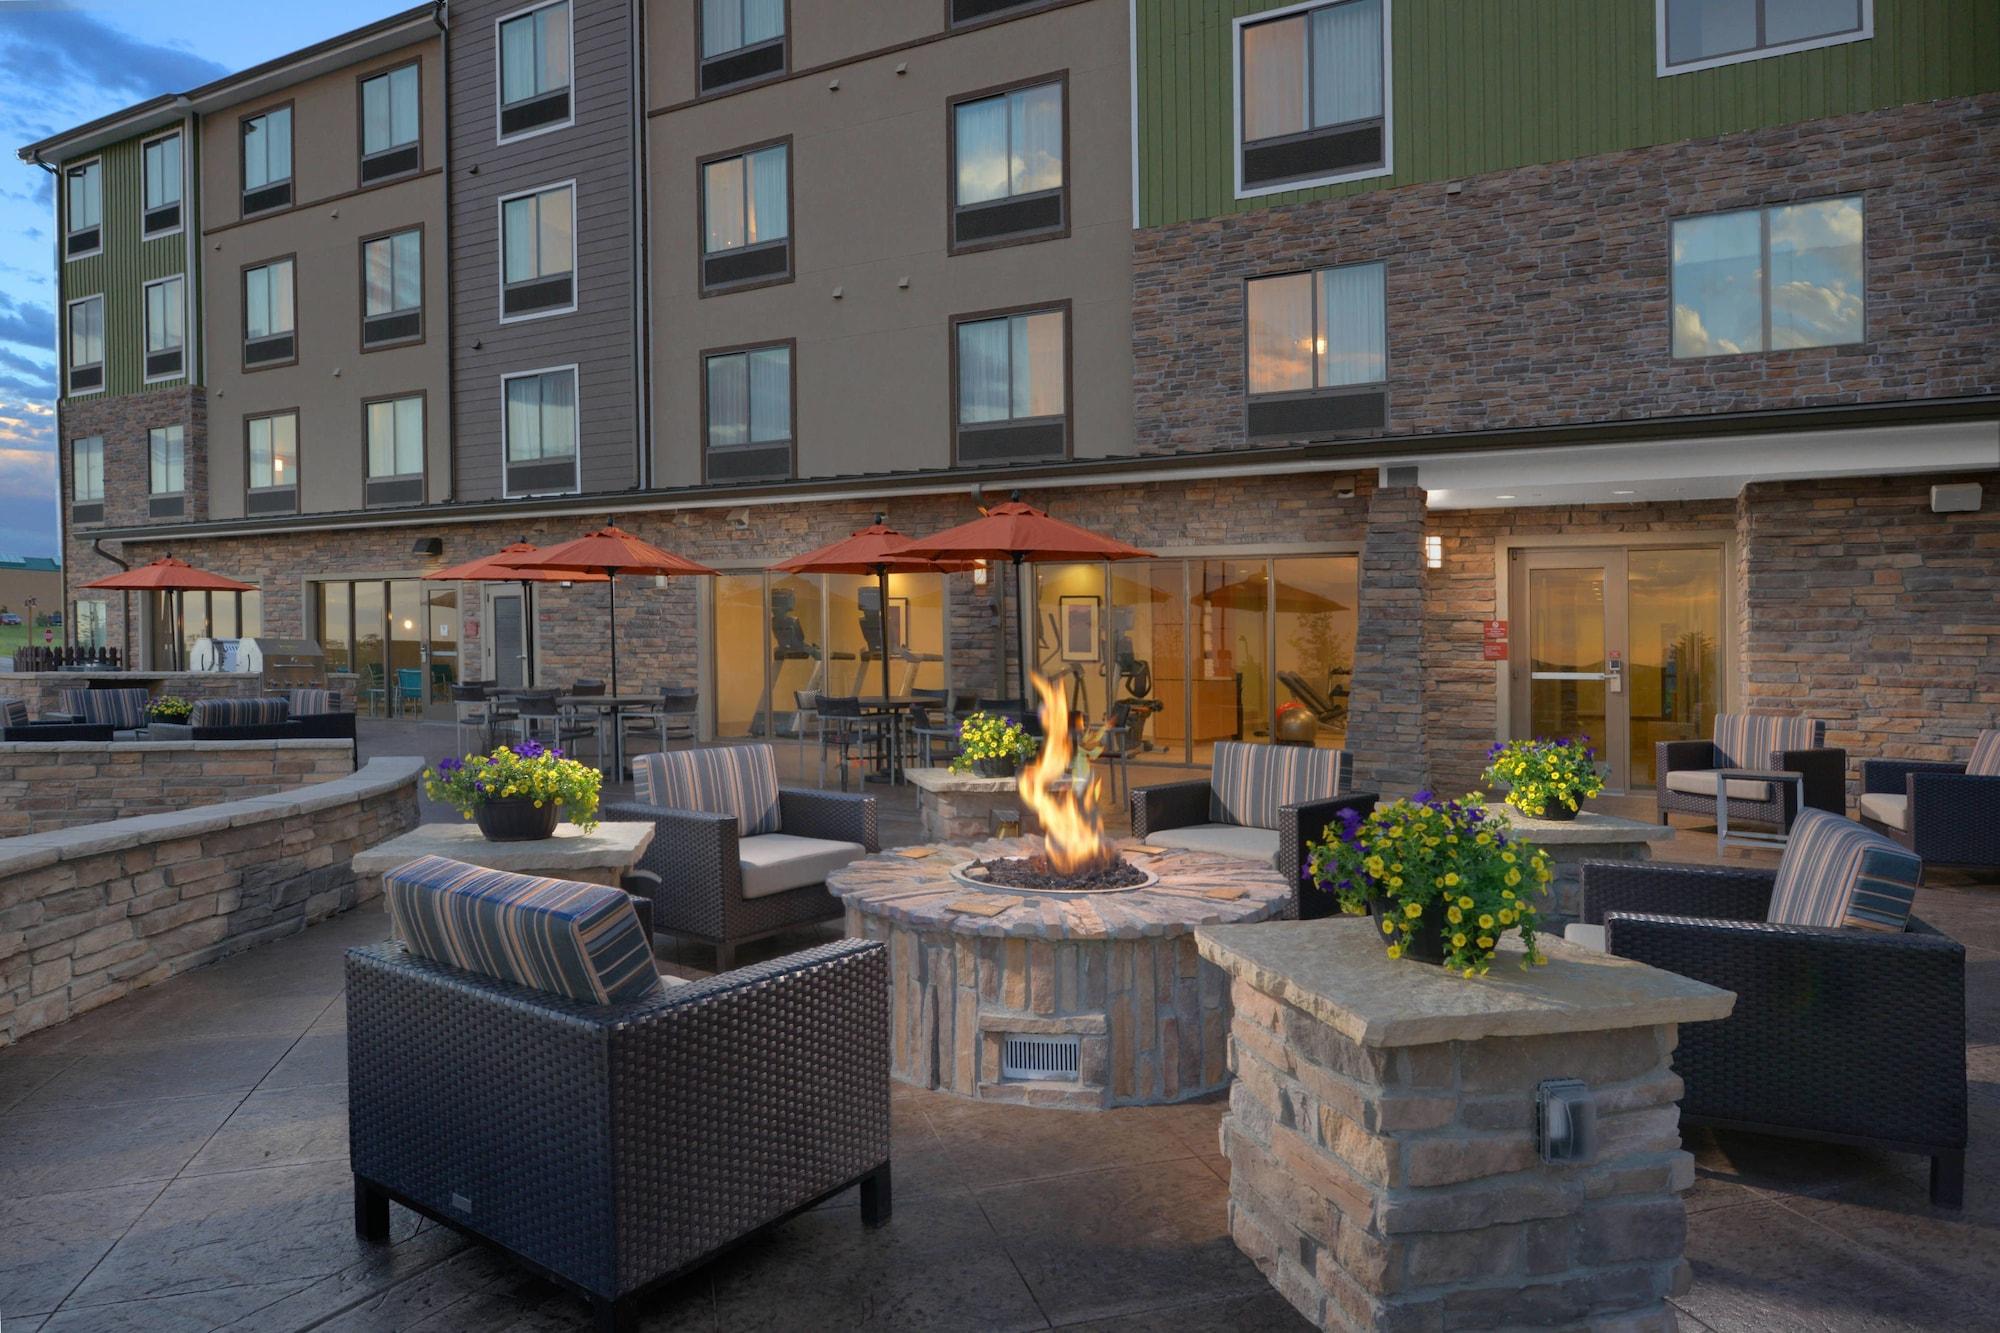 TownePlace Suites Denver South/Lone Tree